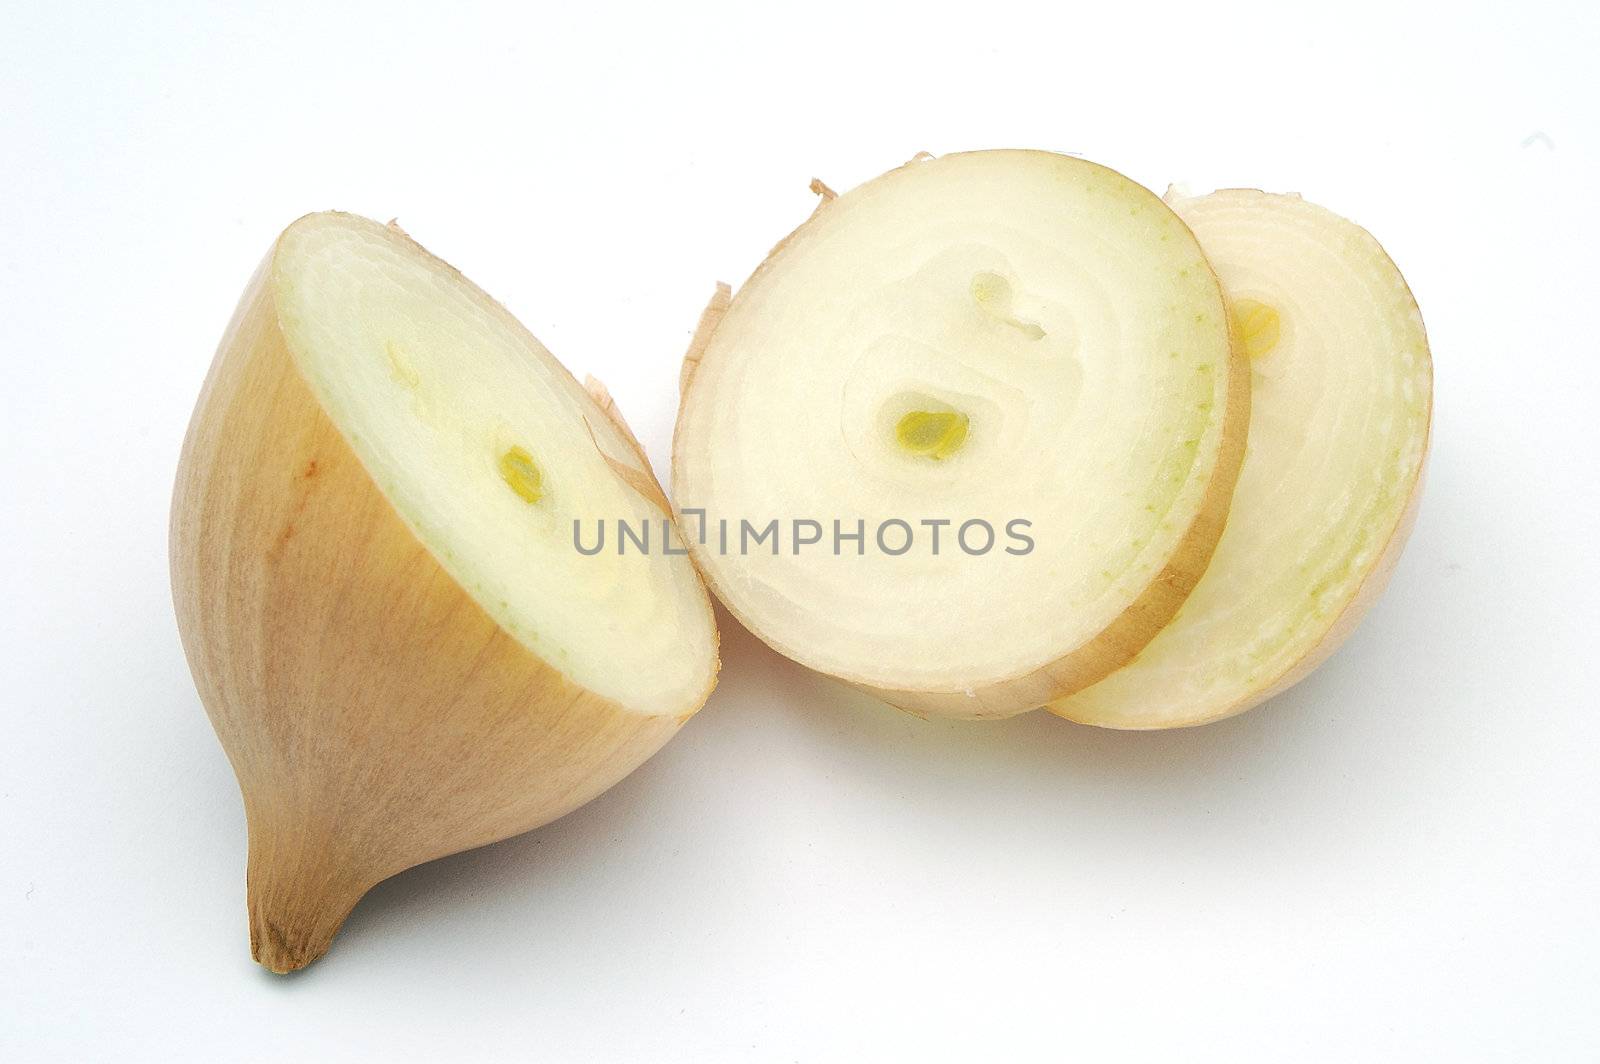 Some onions on the white background